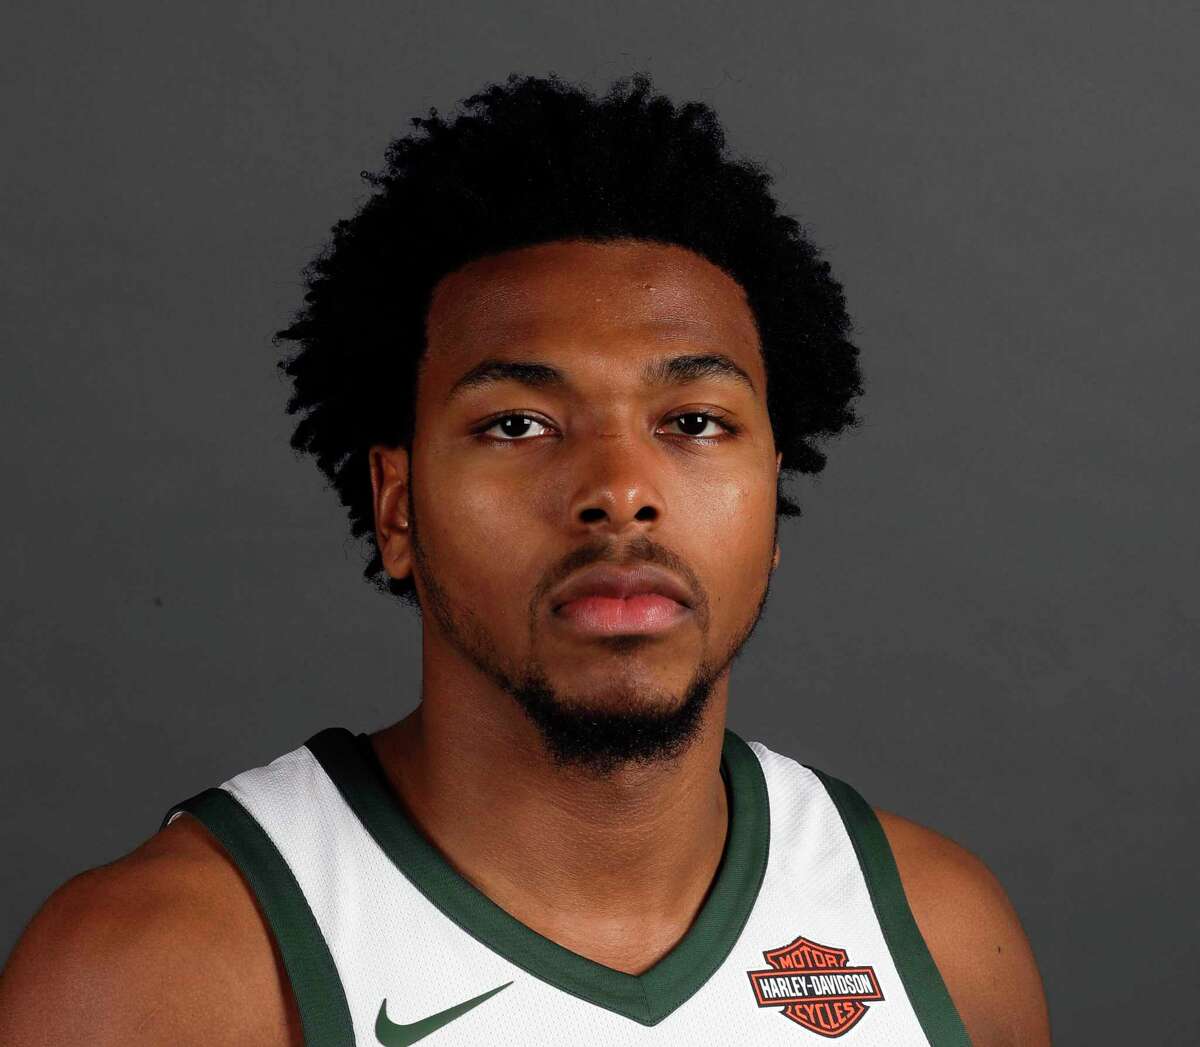 FILE - In this Sept. 25, 2017, file photo, Milwaukee Bucks' Sterling Brown poses for photos during NBA basketball team media day in Milwaukee. Newly released police videos showing the stun gun arrest of Bucks guard Sterling Brown show one officer stepping on Brown's ankle while he was handcuffed on the ground and others discussing the potential backlash of taking down an African American professional basketball player. Brown was arrested for a parking violation in Milwaukee in January.(AP Photo/Morry Gash, File)